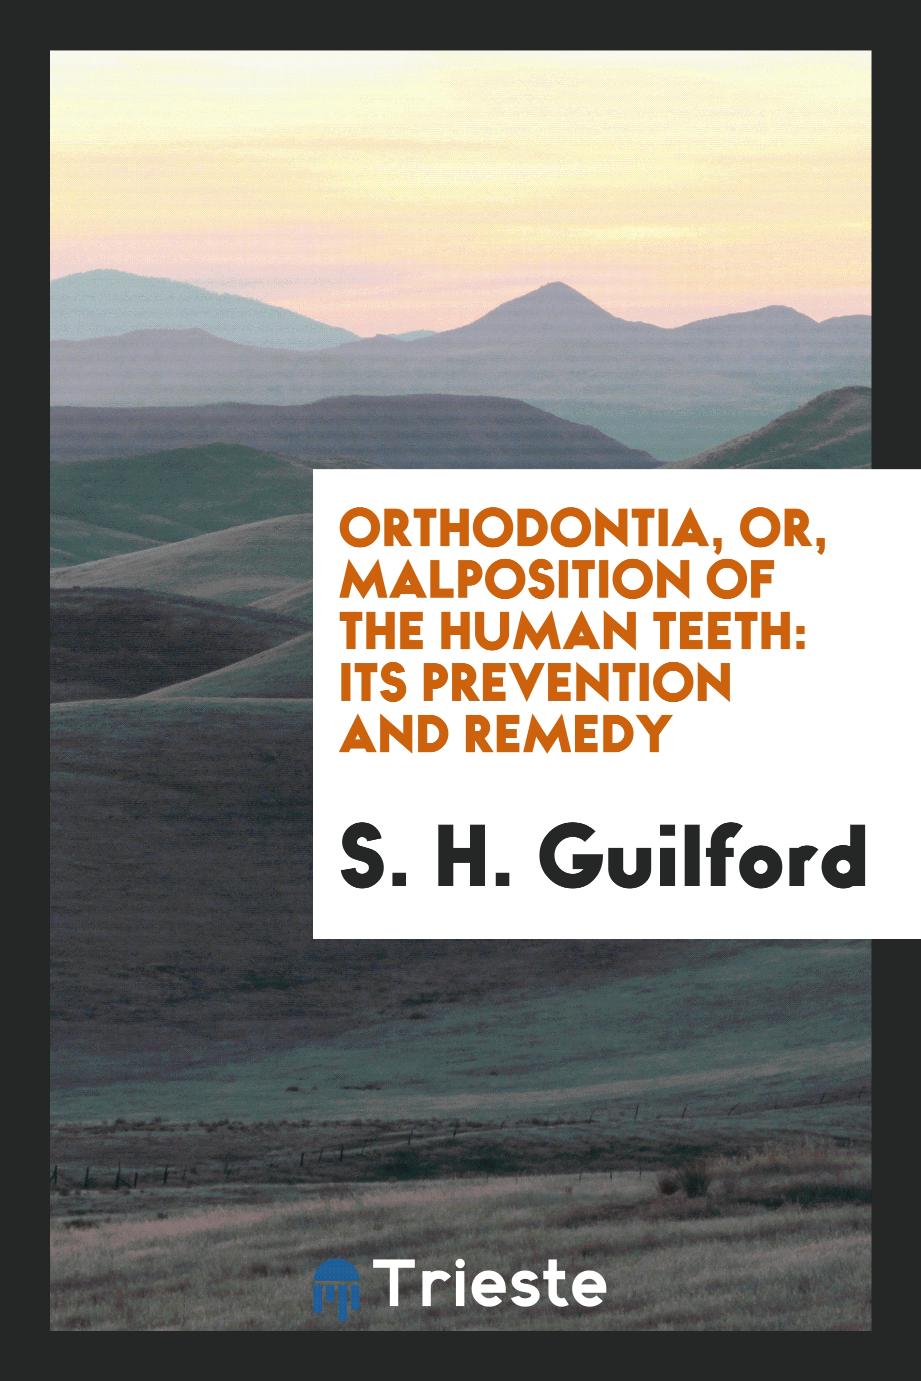 Orthodontia, or, Malposition of the Human Teeth: Its Prevention and Remedy